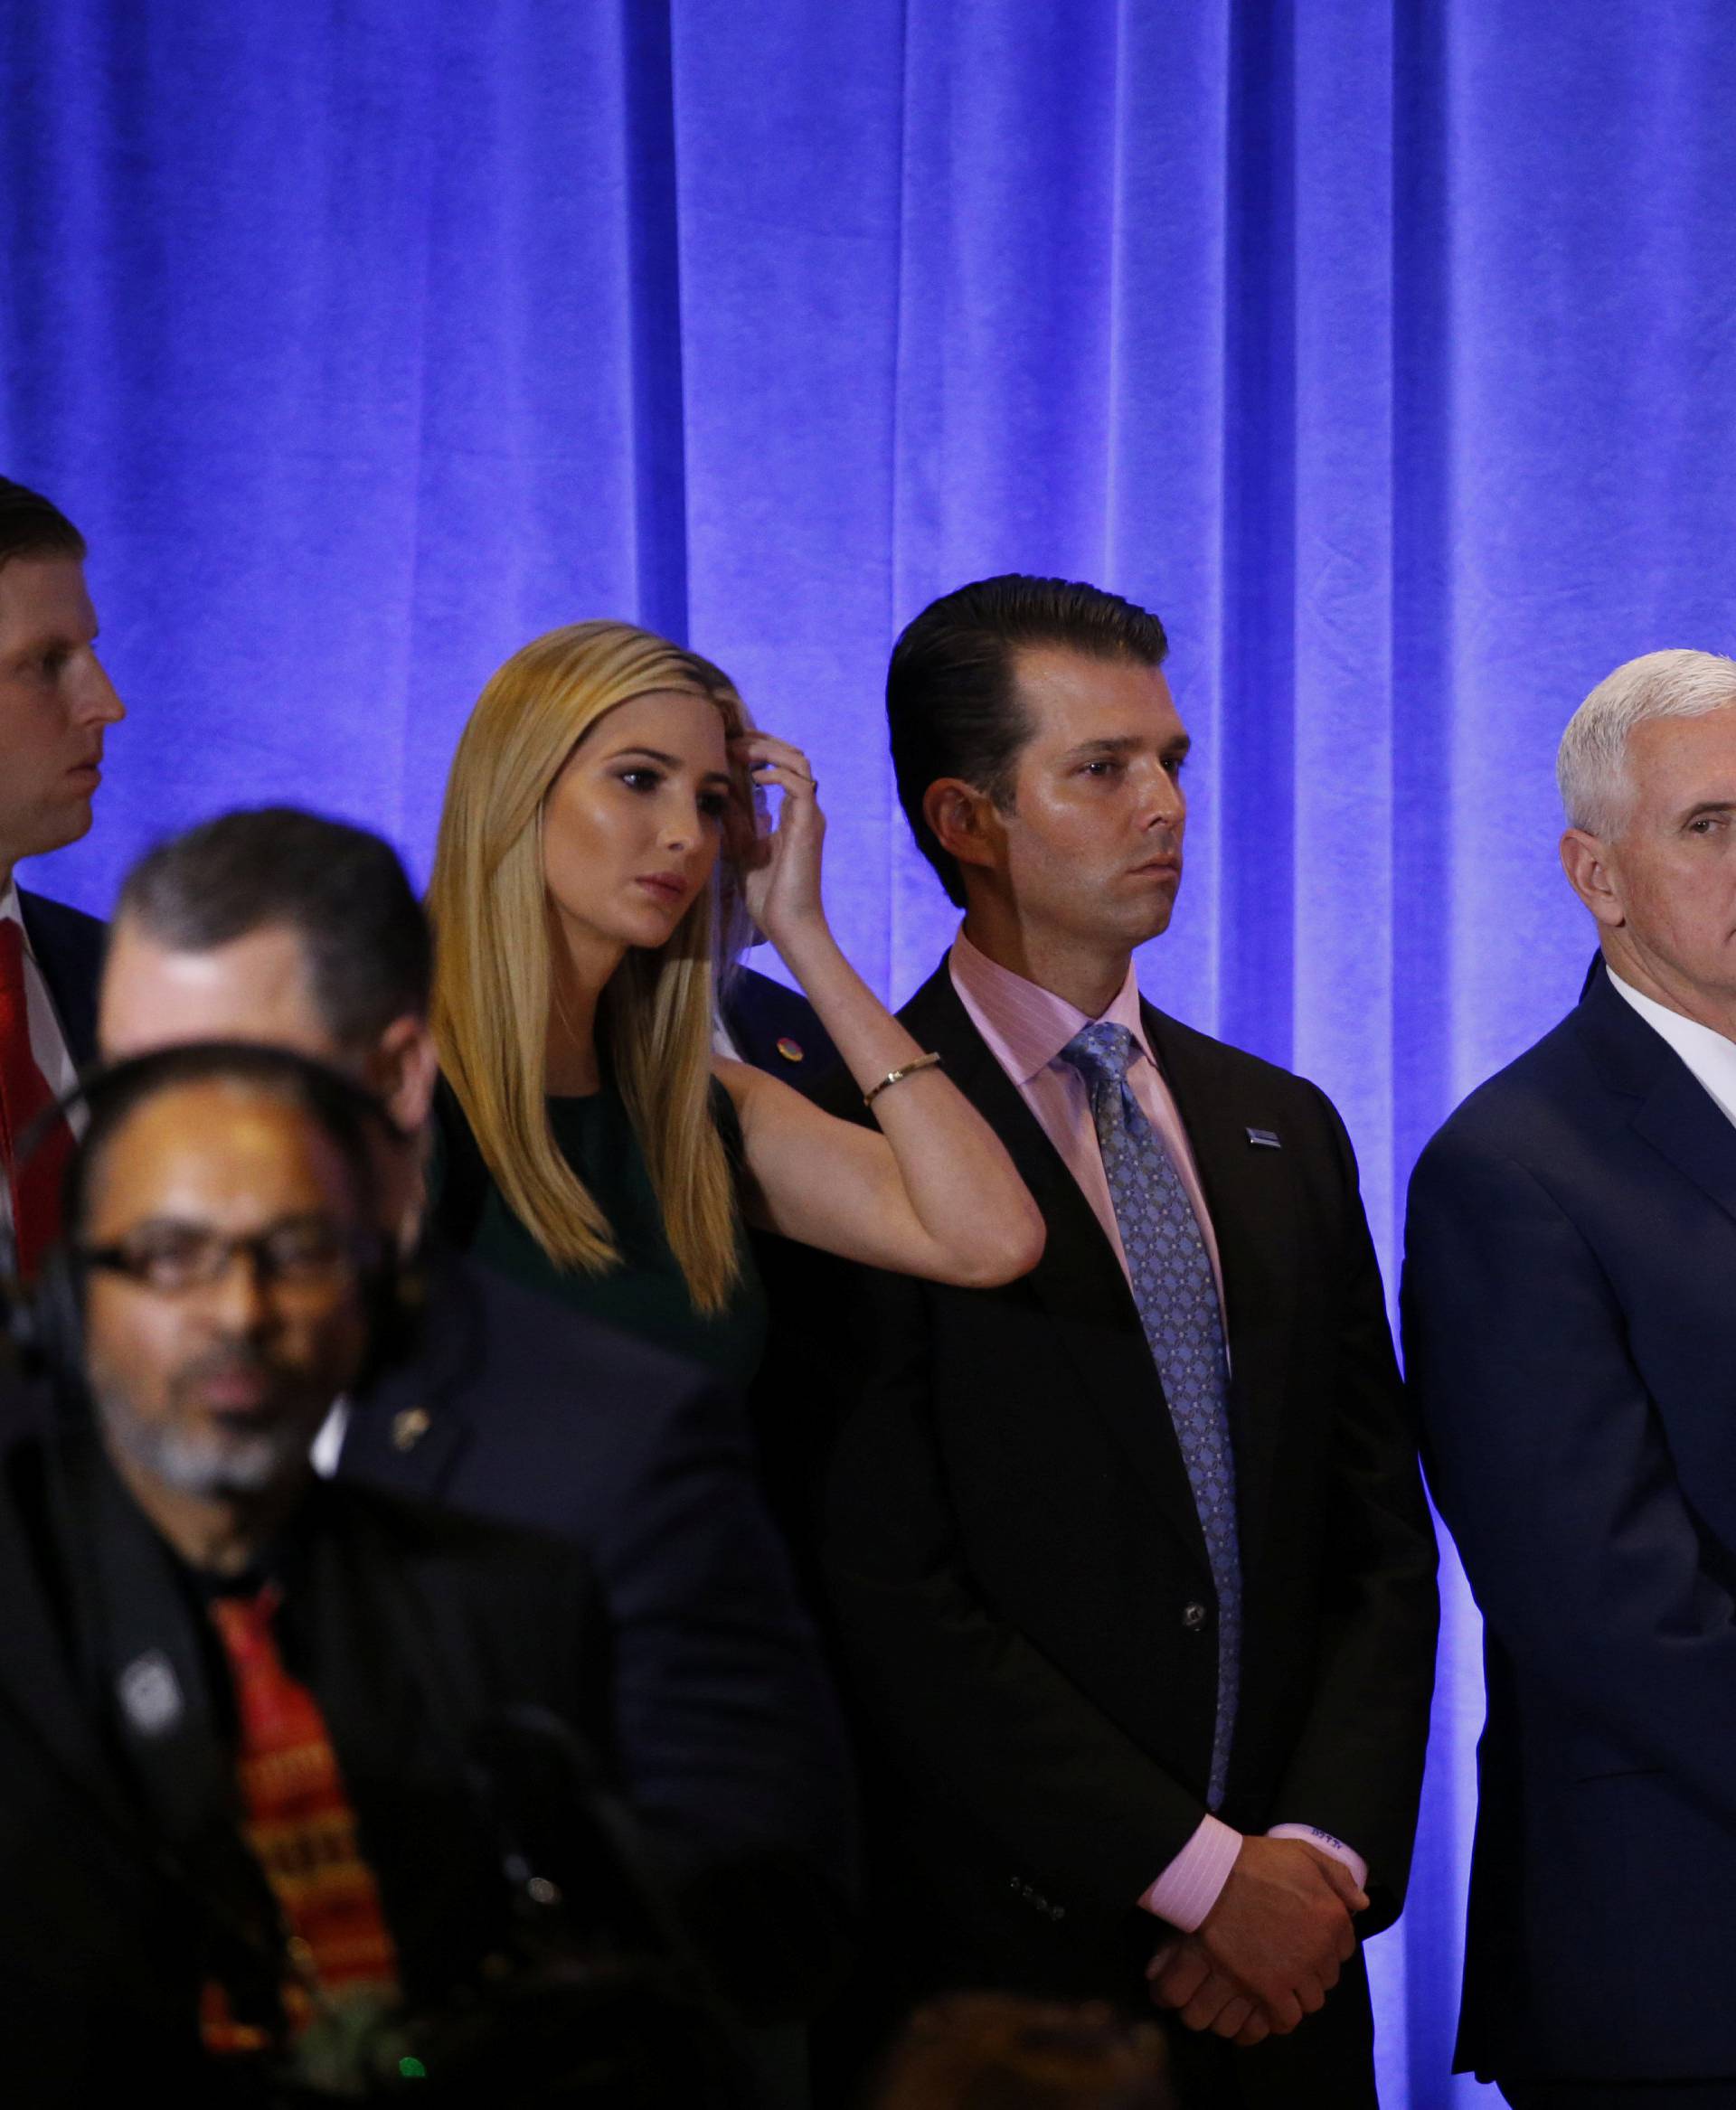 U.S. President-elect Donald Trump stands with Vice President-elect Mike Pence, his sons Donald Trump Jr. and Eric Trump, and daughter Ivanka, during a news conference in the lobby of Trump Tower in Manhattan, New York City